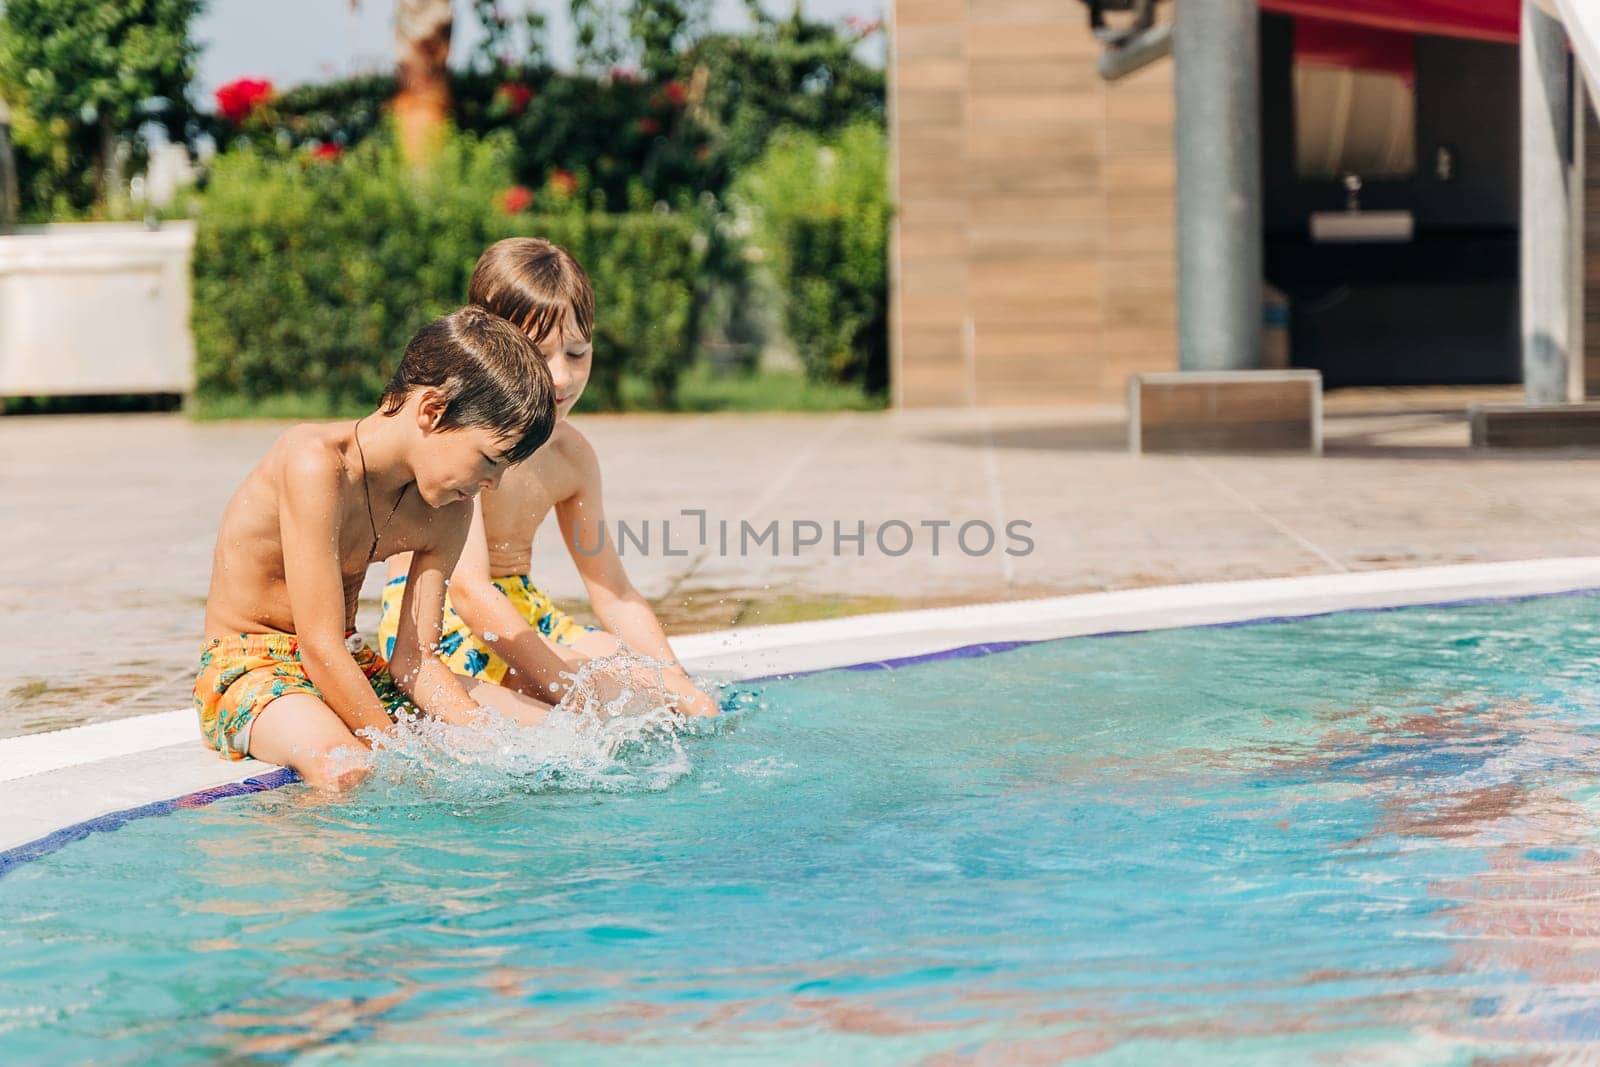 Two brothers Childs laughing while playing in swimming pool at sunny day. Kids friends boys refreshing at heat weather, active vacation and healthy lifestyle. Happy summer.